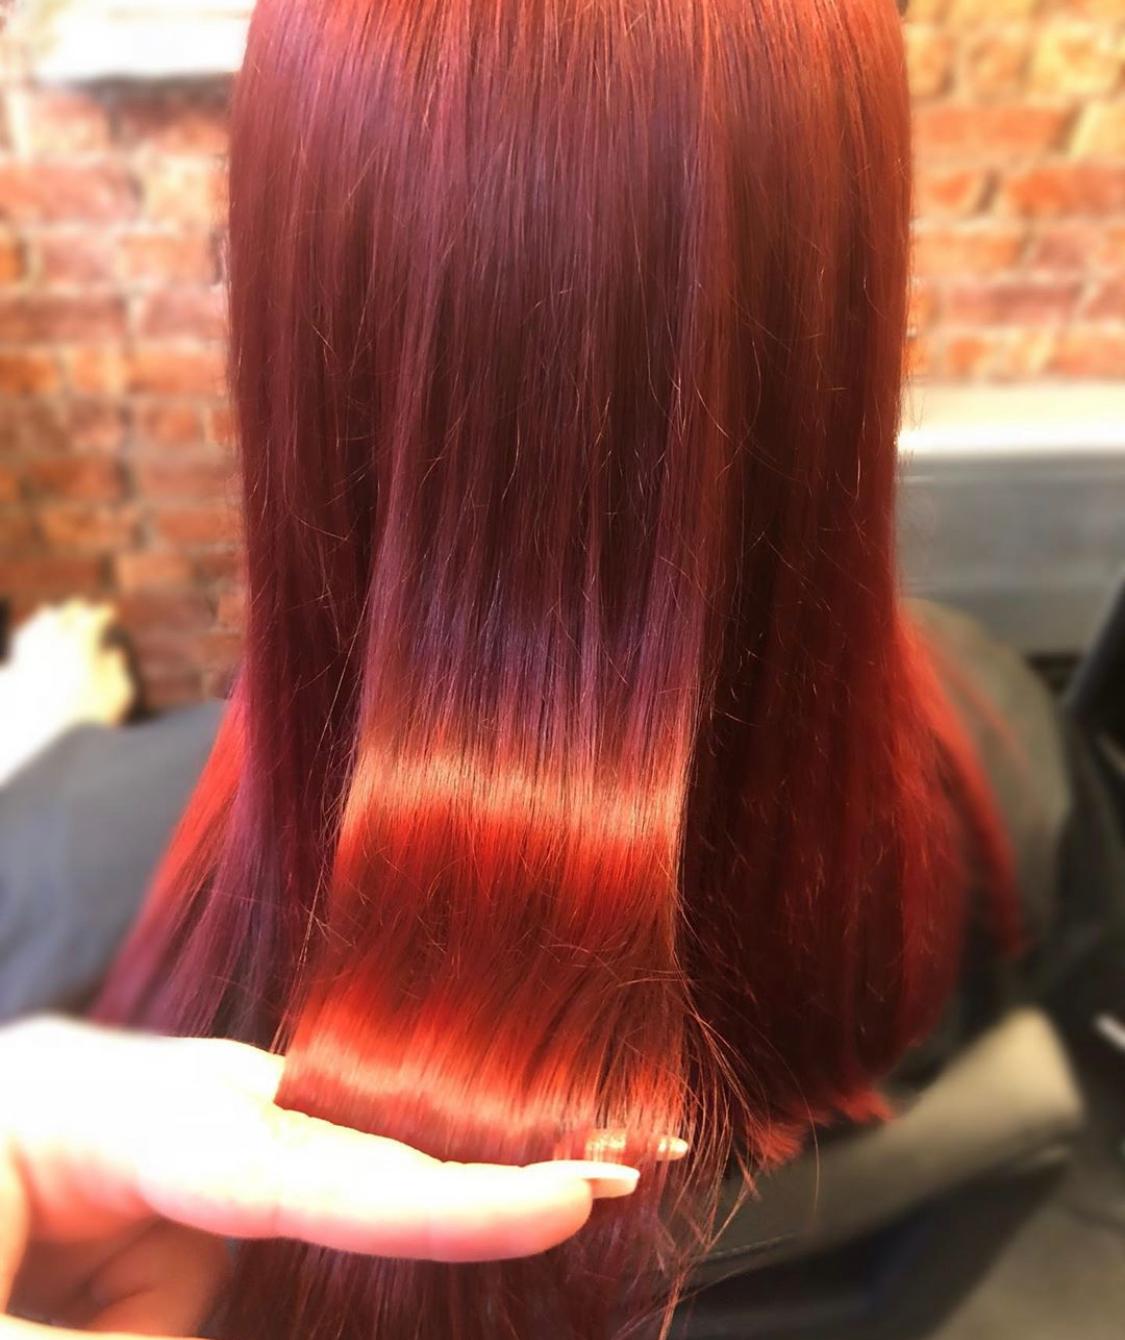 Look at this Gorgeous Red! That Shine by adding a conditioning treatment to this clients colour!